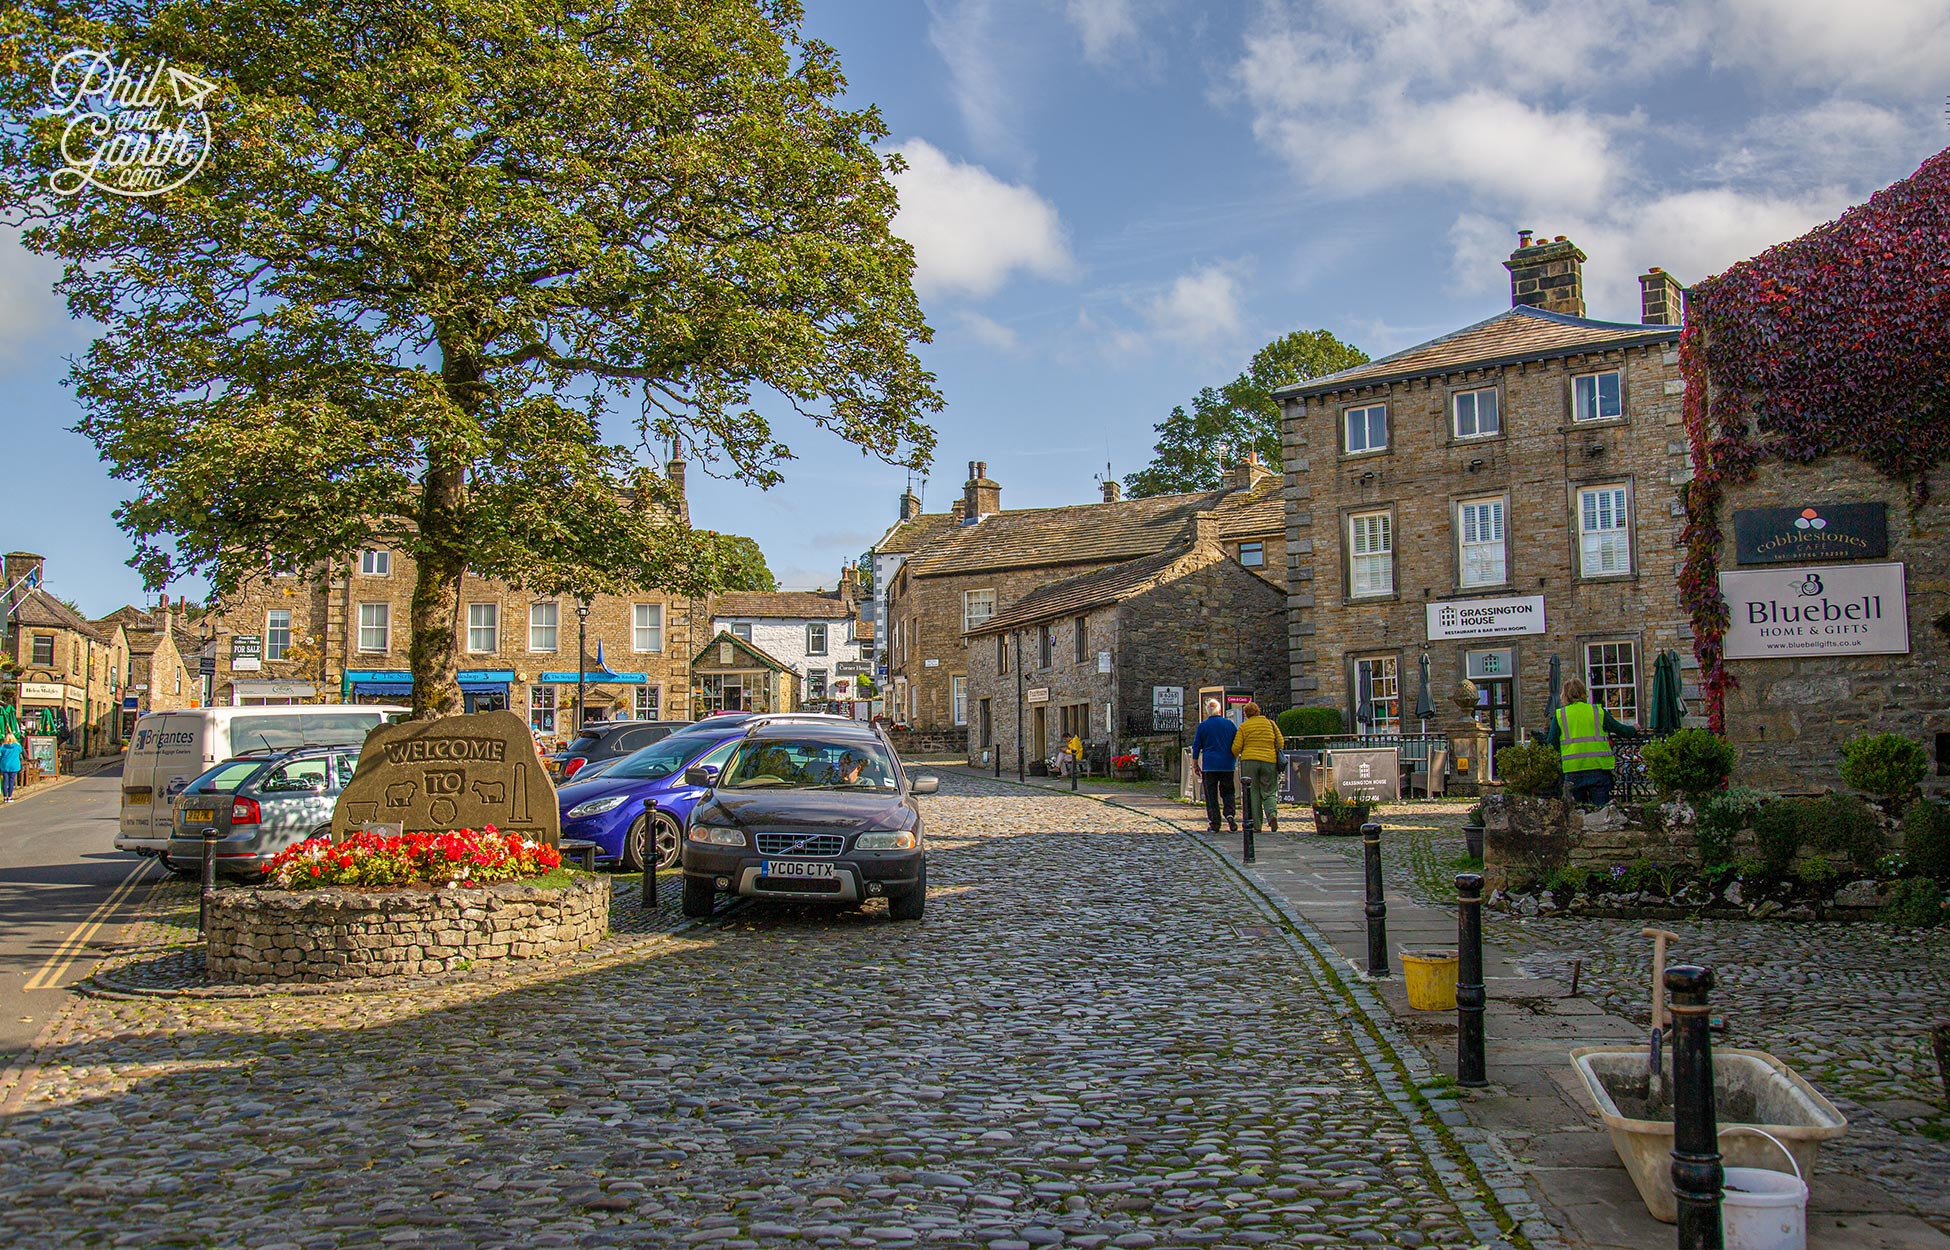 towns and villages to visit in yorkshire